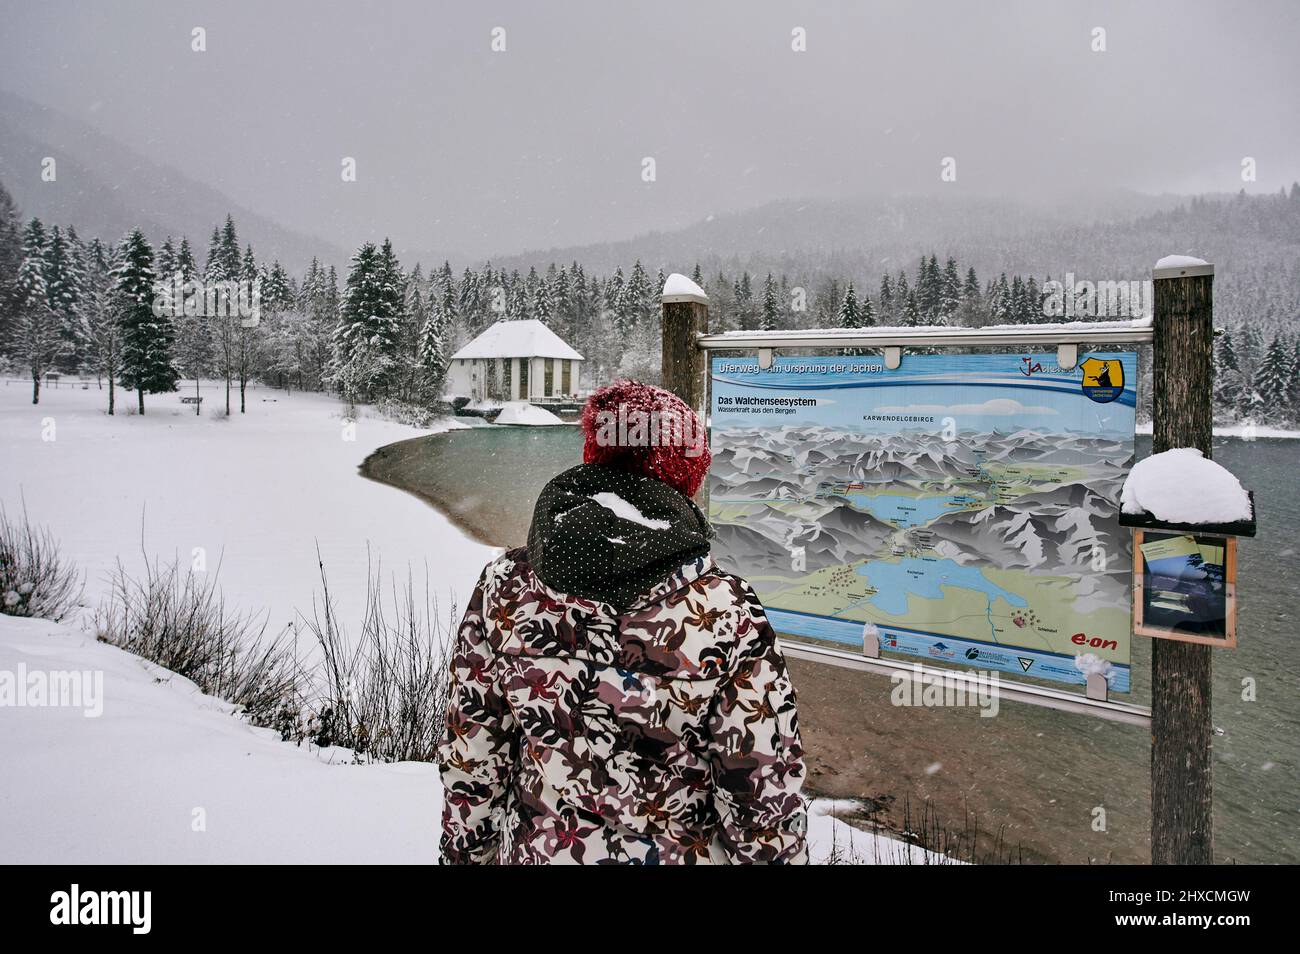 Bavarian landscape in winter, Walchensee in the foothills of the Alps, tourist at the information board about the Walchensee system Stock Photo